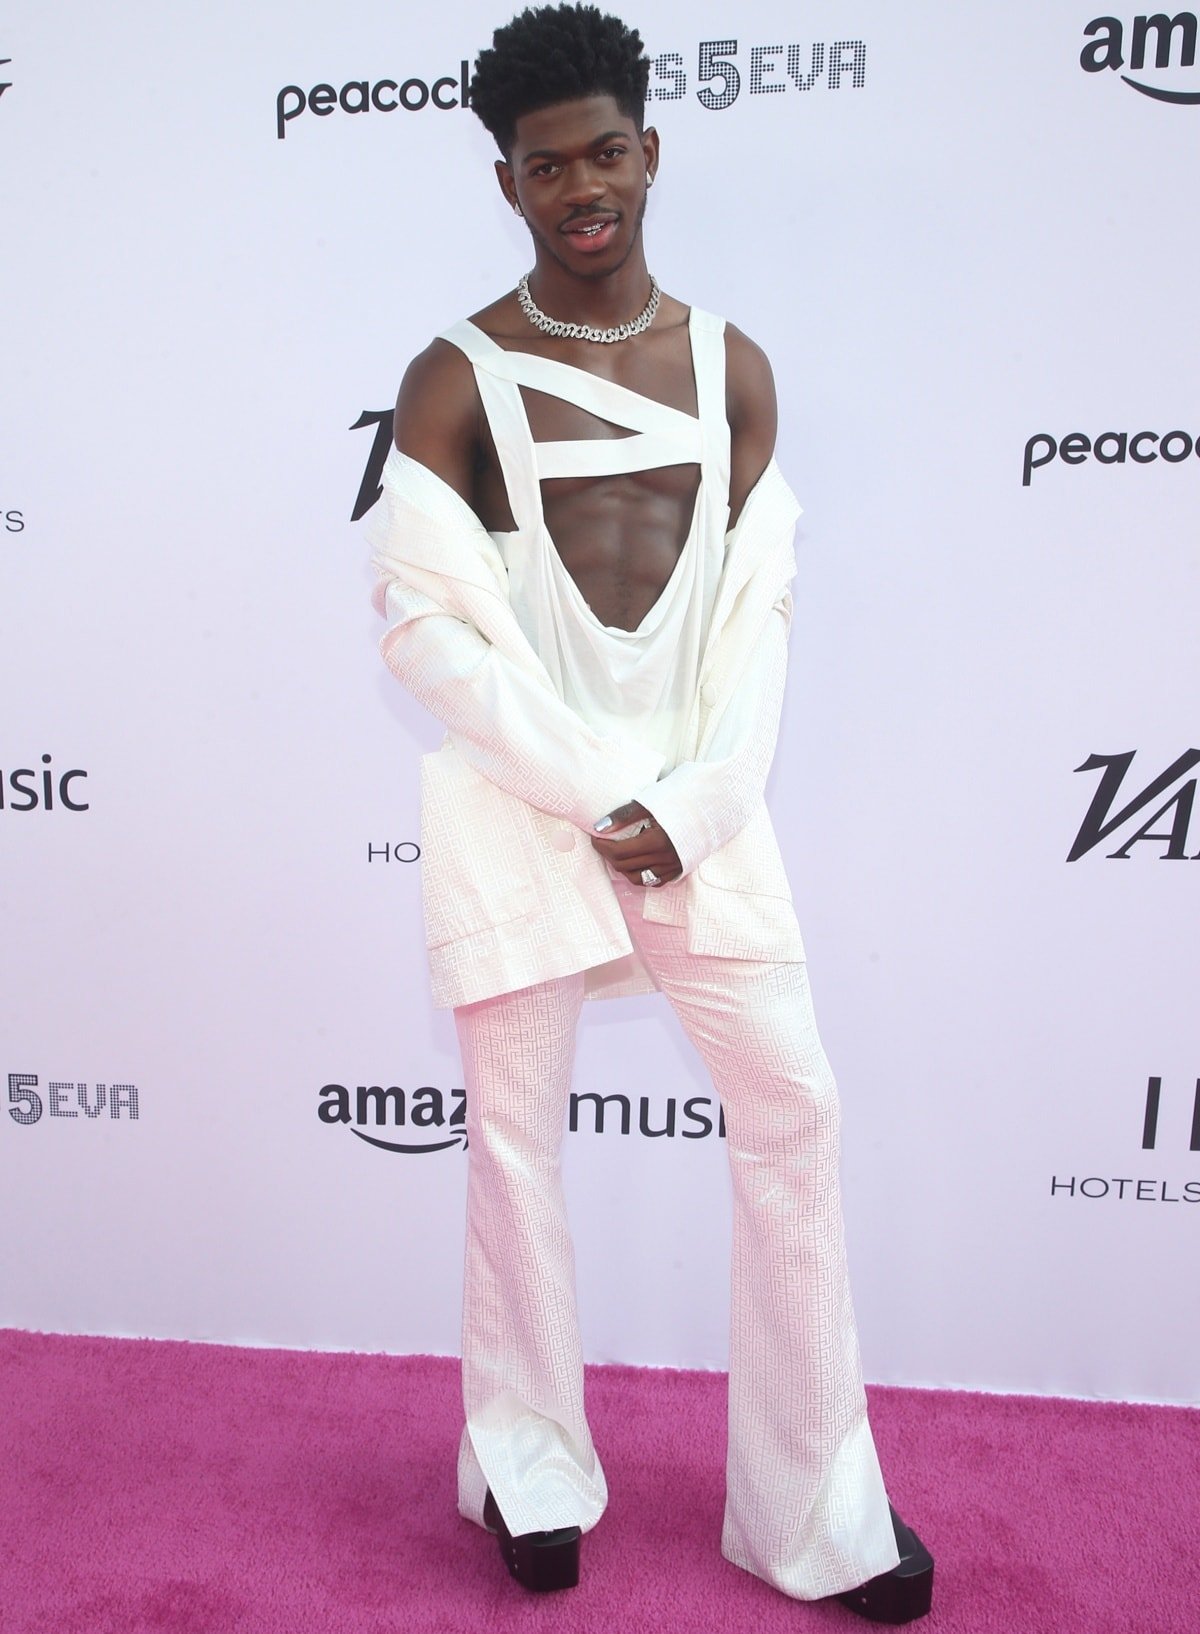 Lil Nas X adding a stylish boost to his height in platform boots at the 2021 Variety Hitmakers event